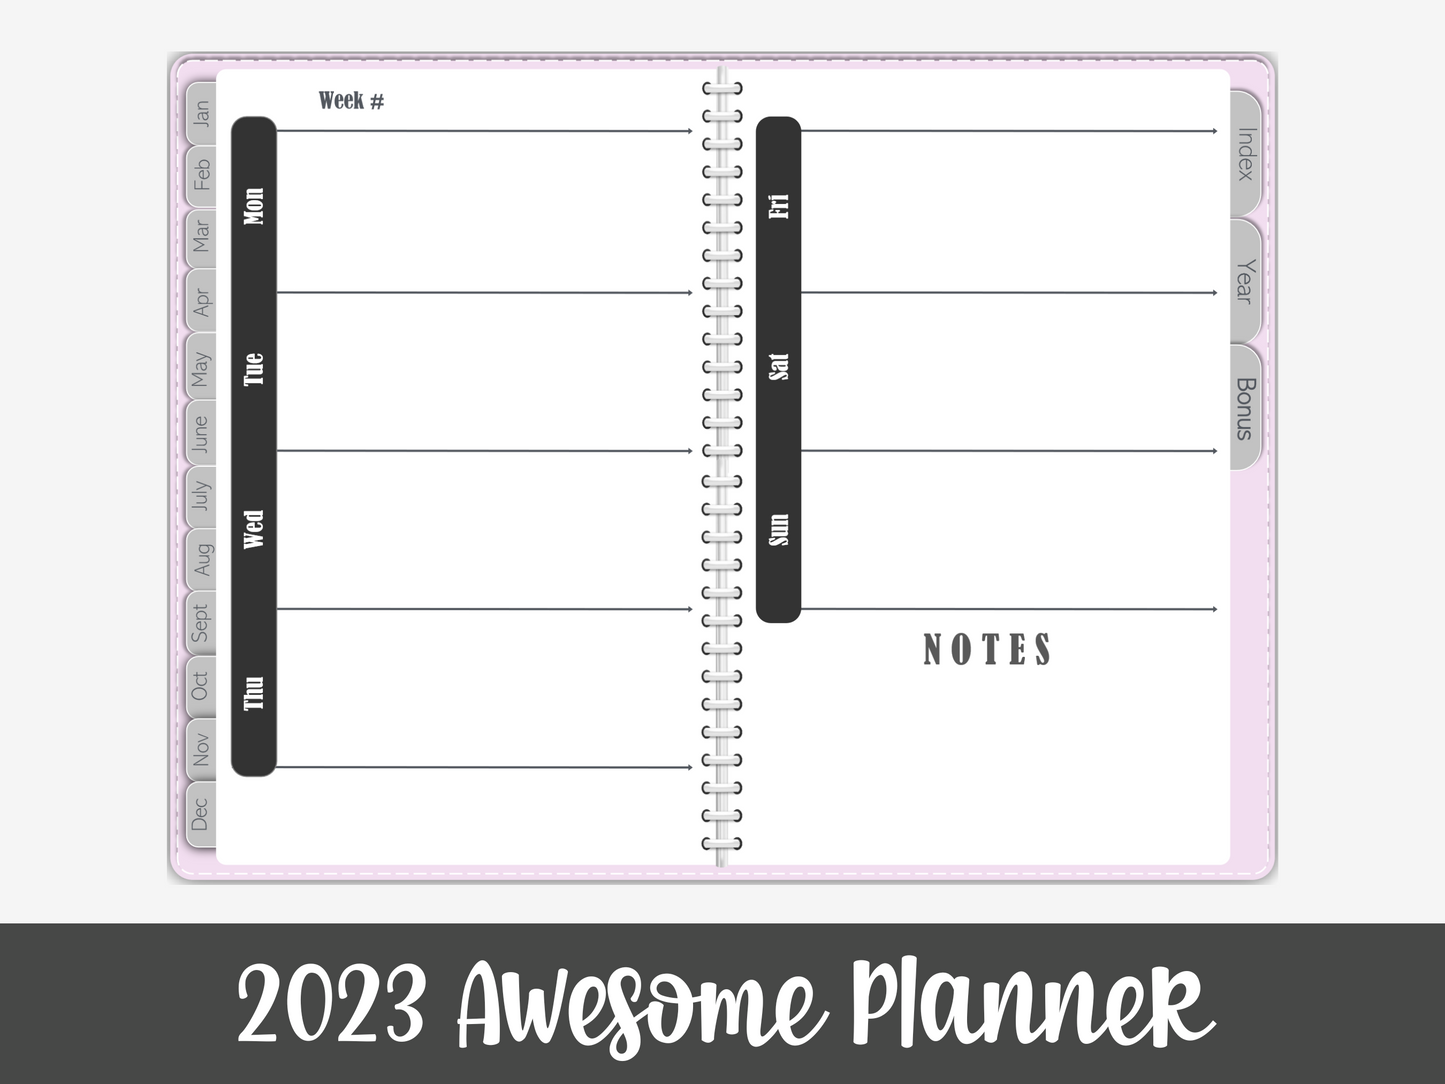 2023 PDF Awesome Planner - Pink